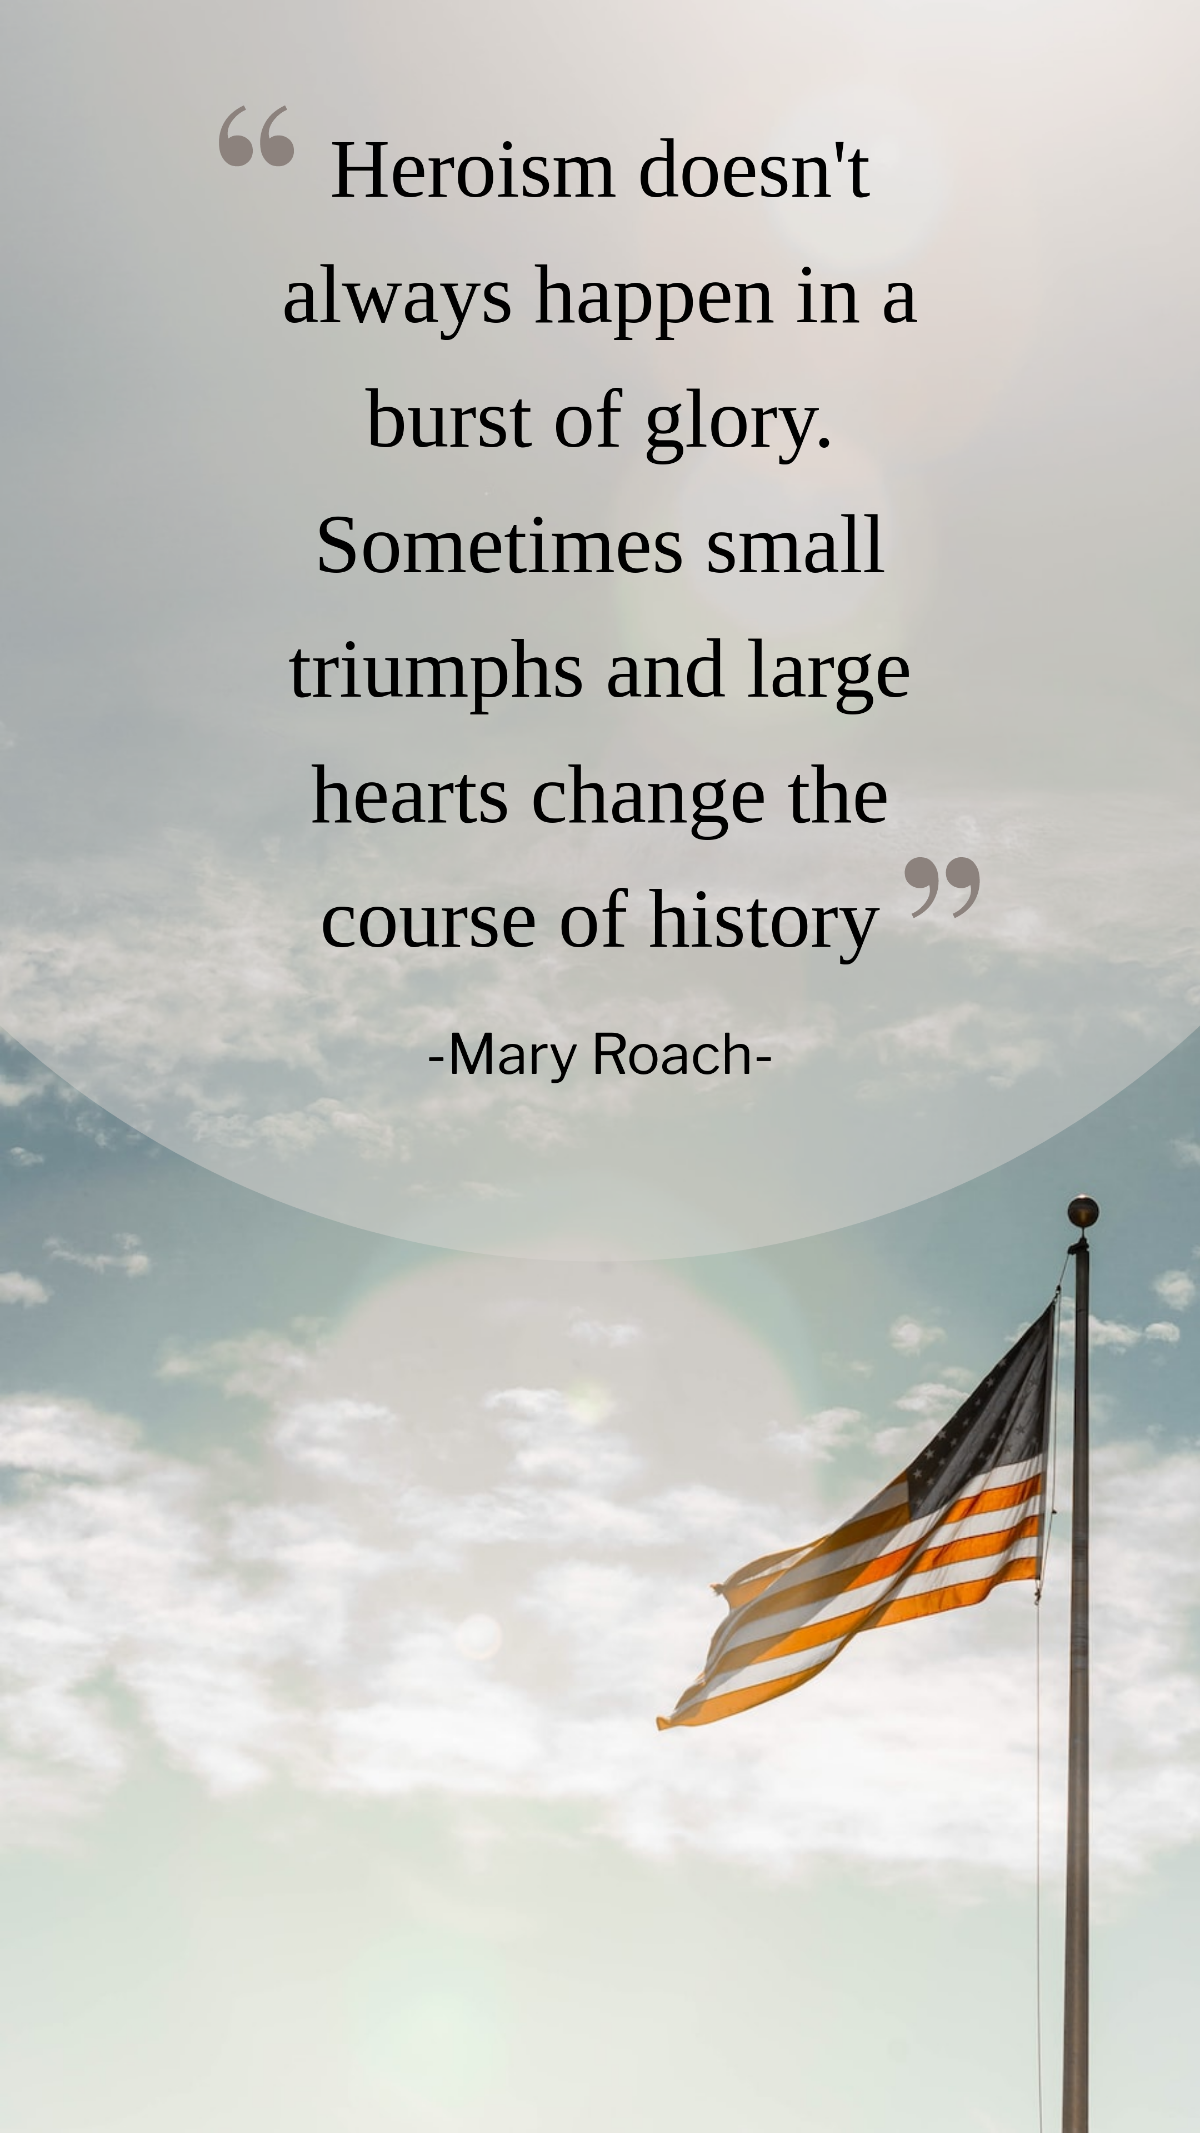 Free Mary Roach - Heroism doesn't always happen in a burst of glory. Sometimes small triumphs and large hearts change the course of history Template